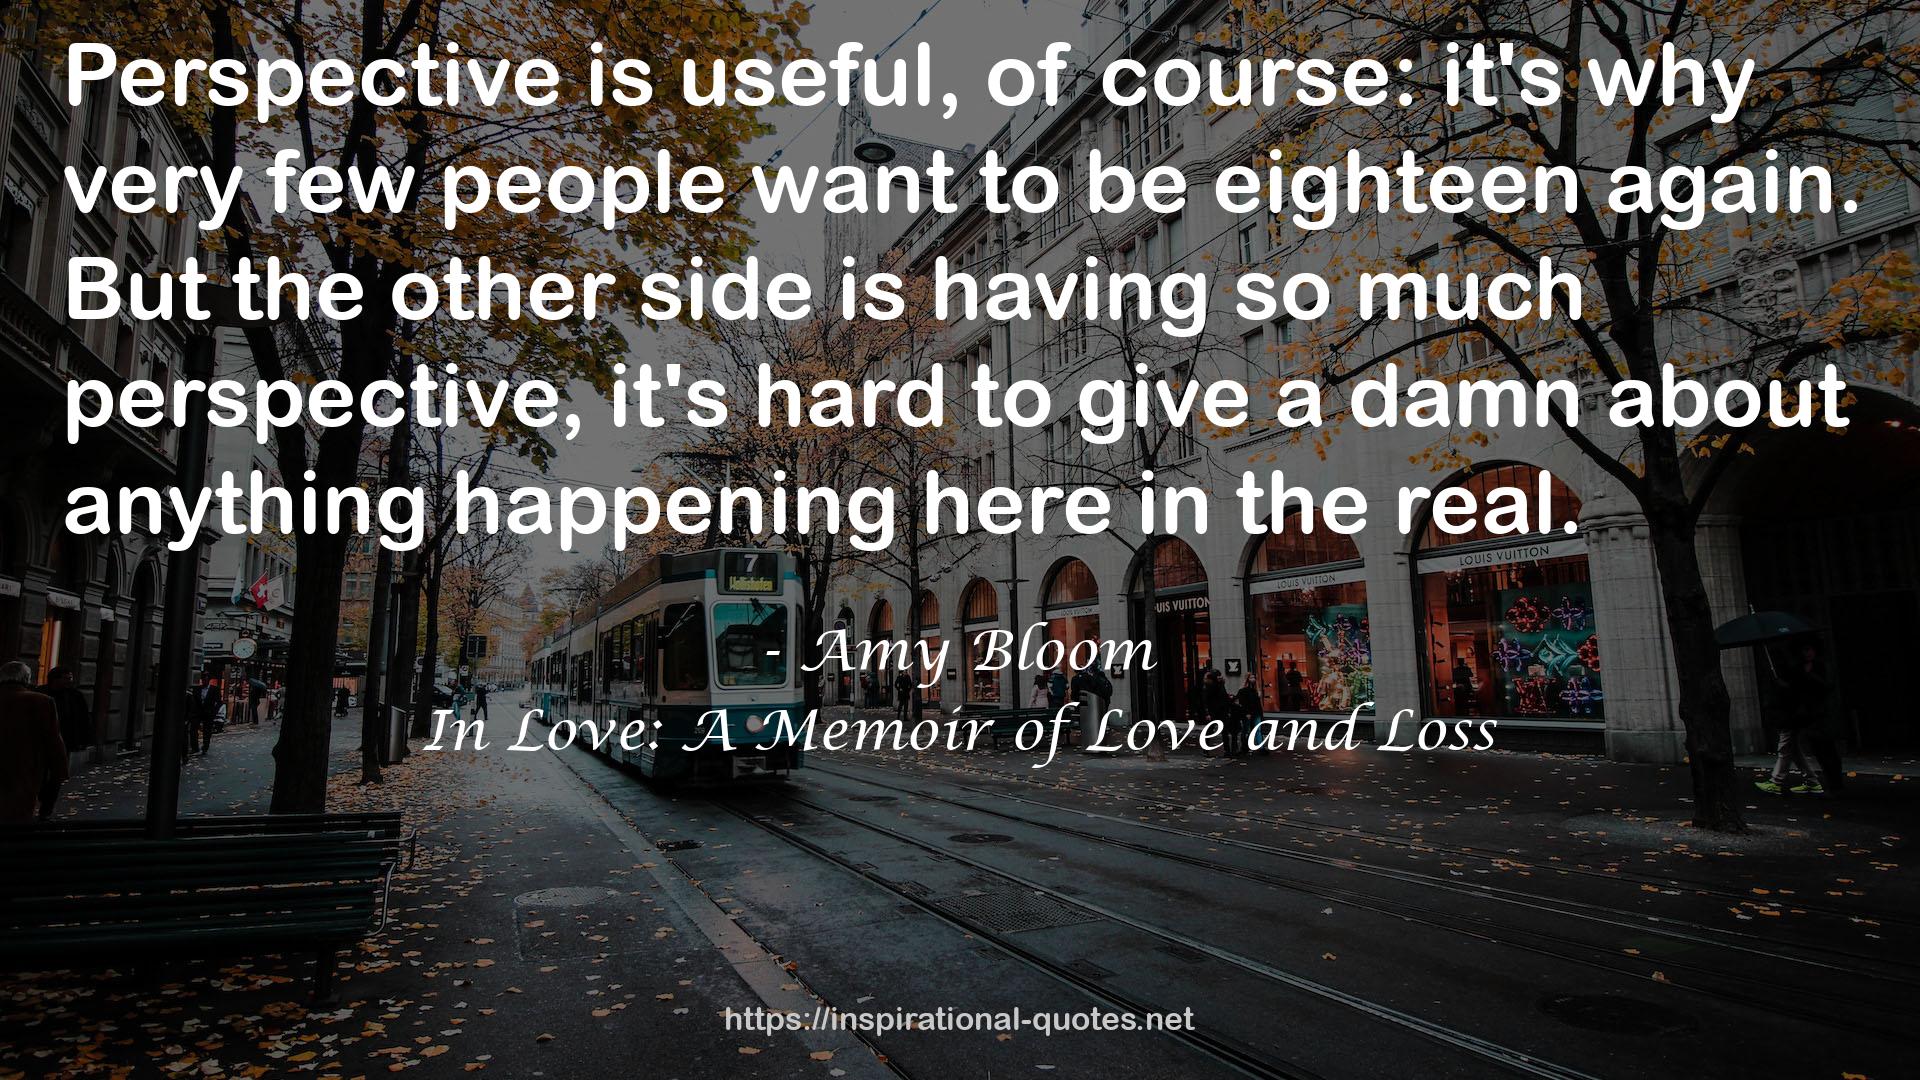 In Love: A Memoir of Love and Loss QUOTES